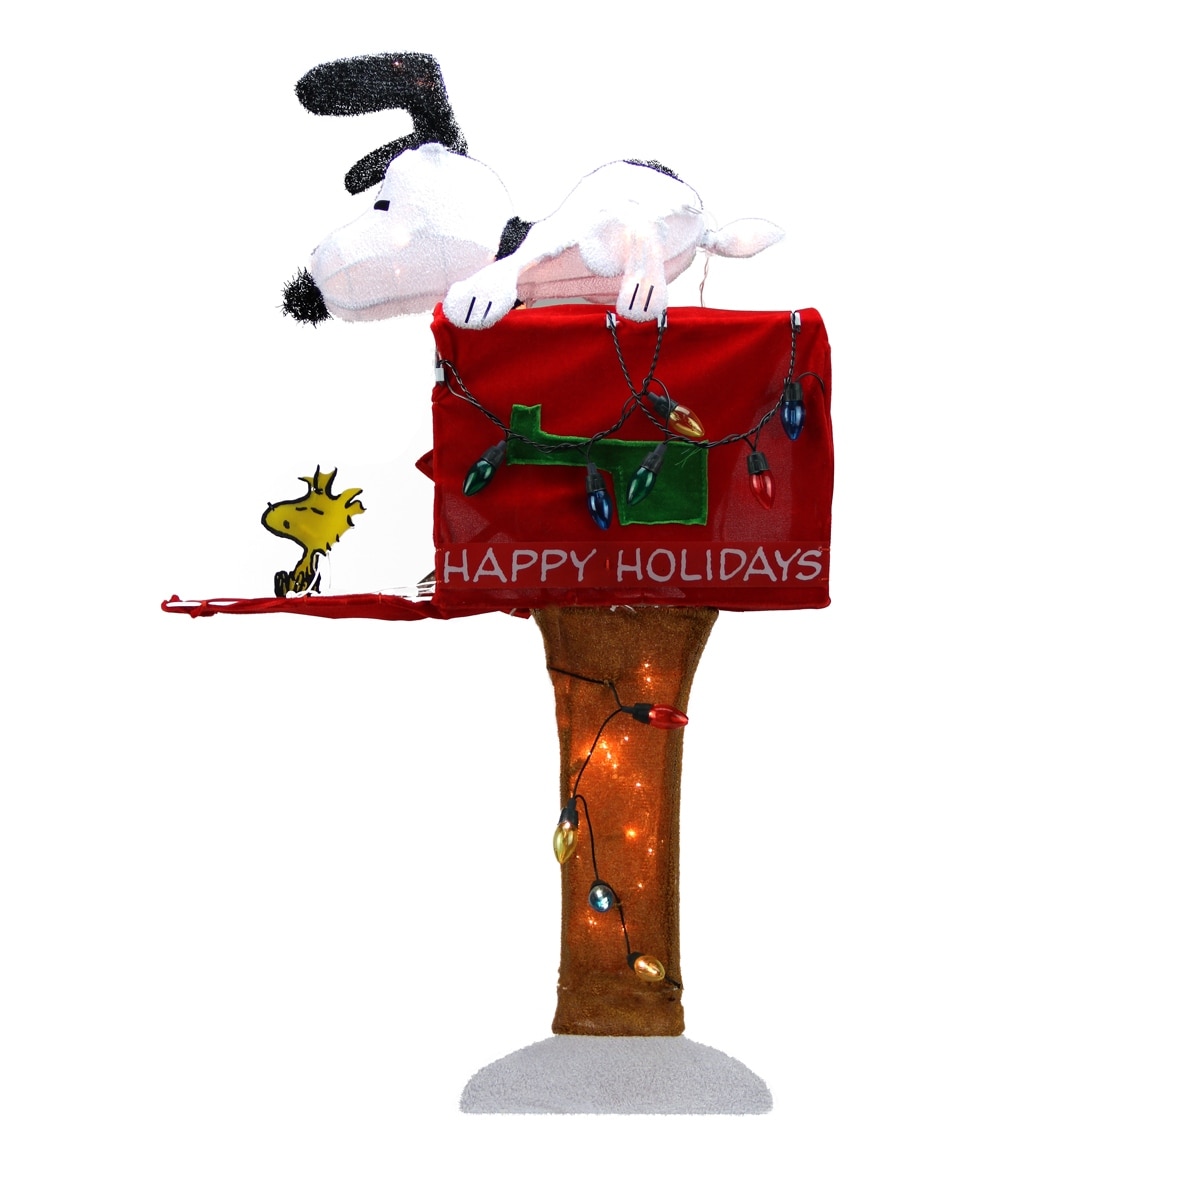 https://ak1.ostkcdn.com/images/products/is/images/direct/35206119f41487e69535b54fcf65f24acdb95c76/36%22-Pre-Lit-Peanuts-Snoopy-with-Red-Mailbox-Animated-Christmas-Outdoor-Decoration---Clear-Lights.jpg